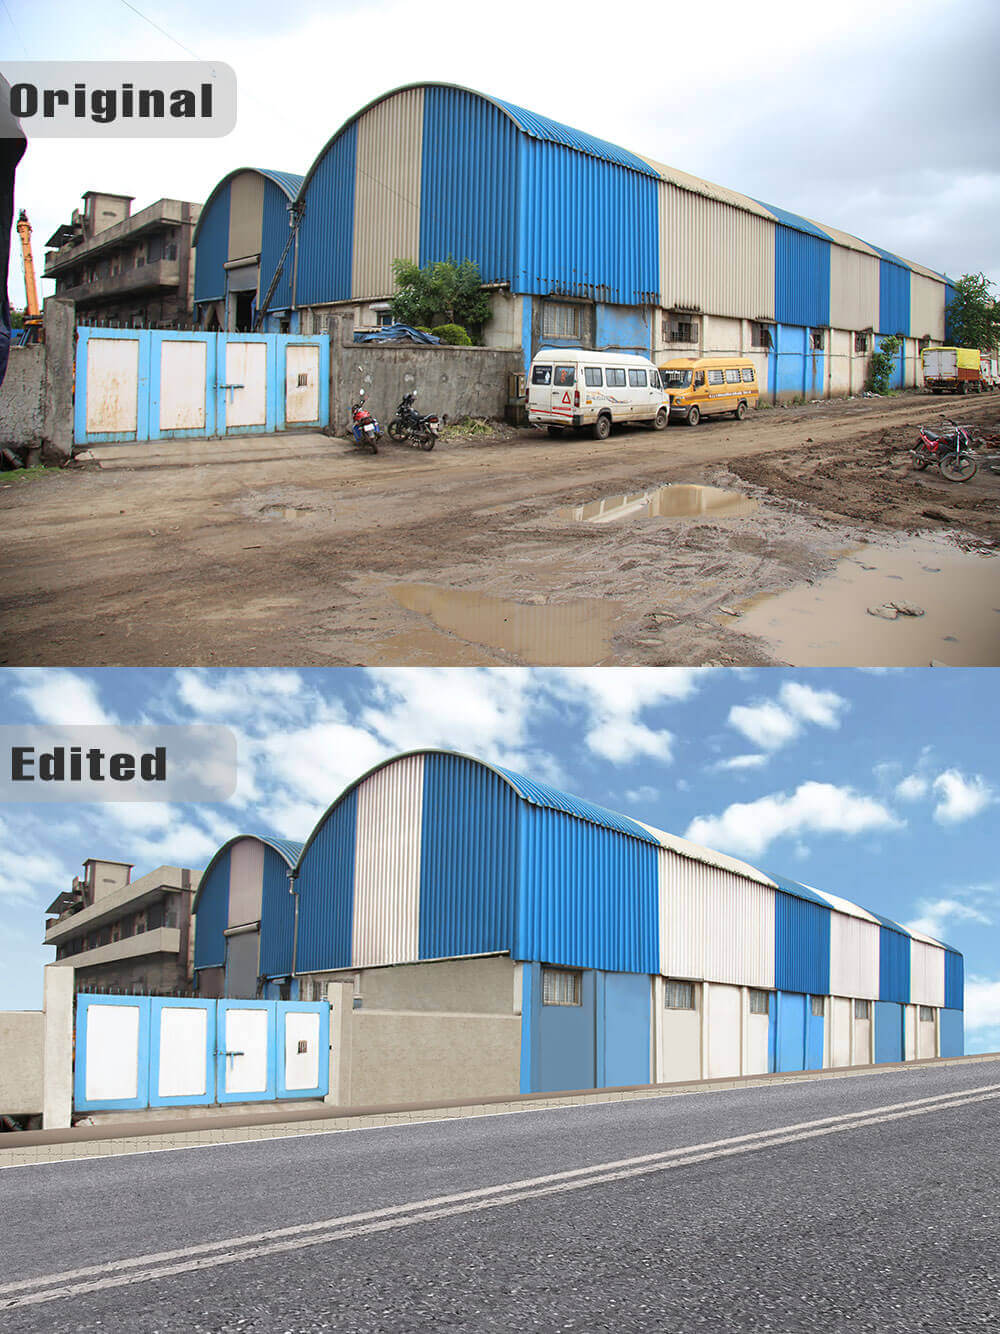 Factory Exterior - Bhiwandi retouched completely